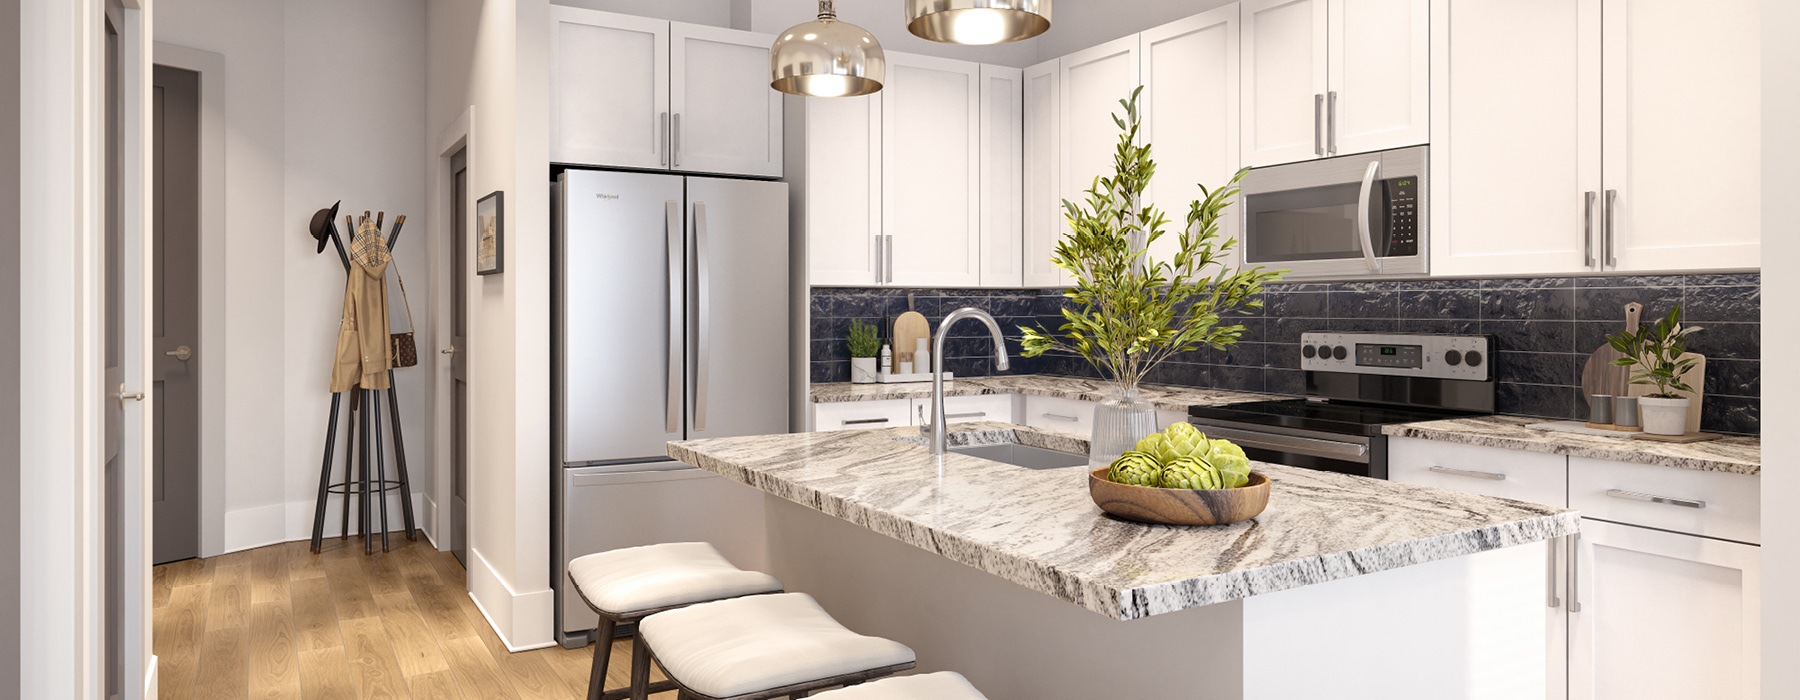 Enclave Piney Mountain Apartments Luxury Kitchens with Granite Countertops